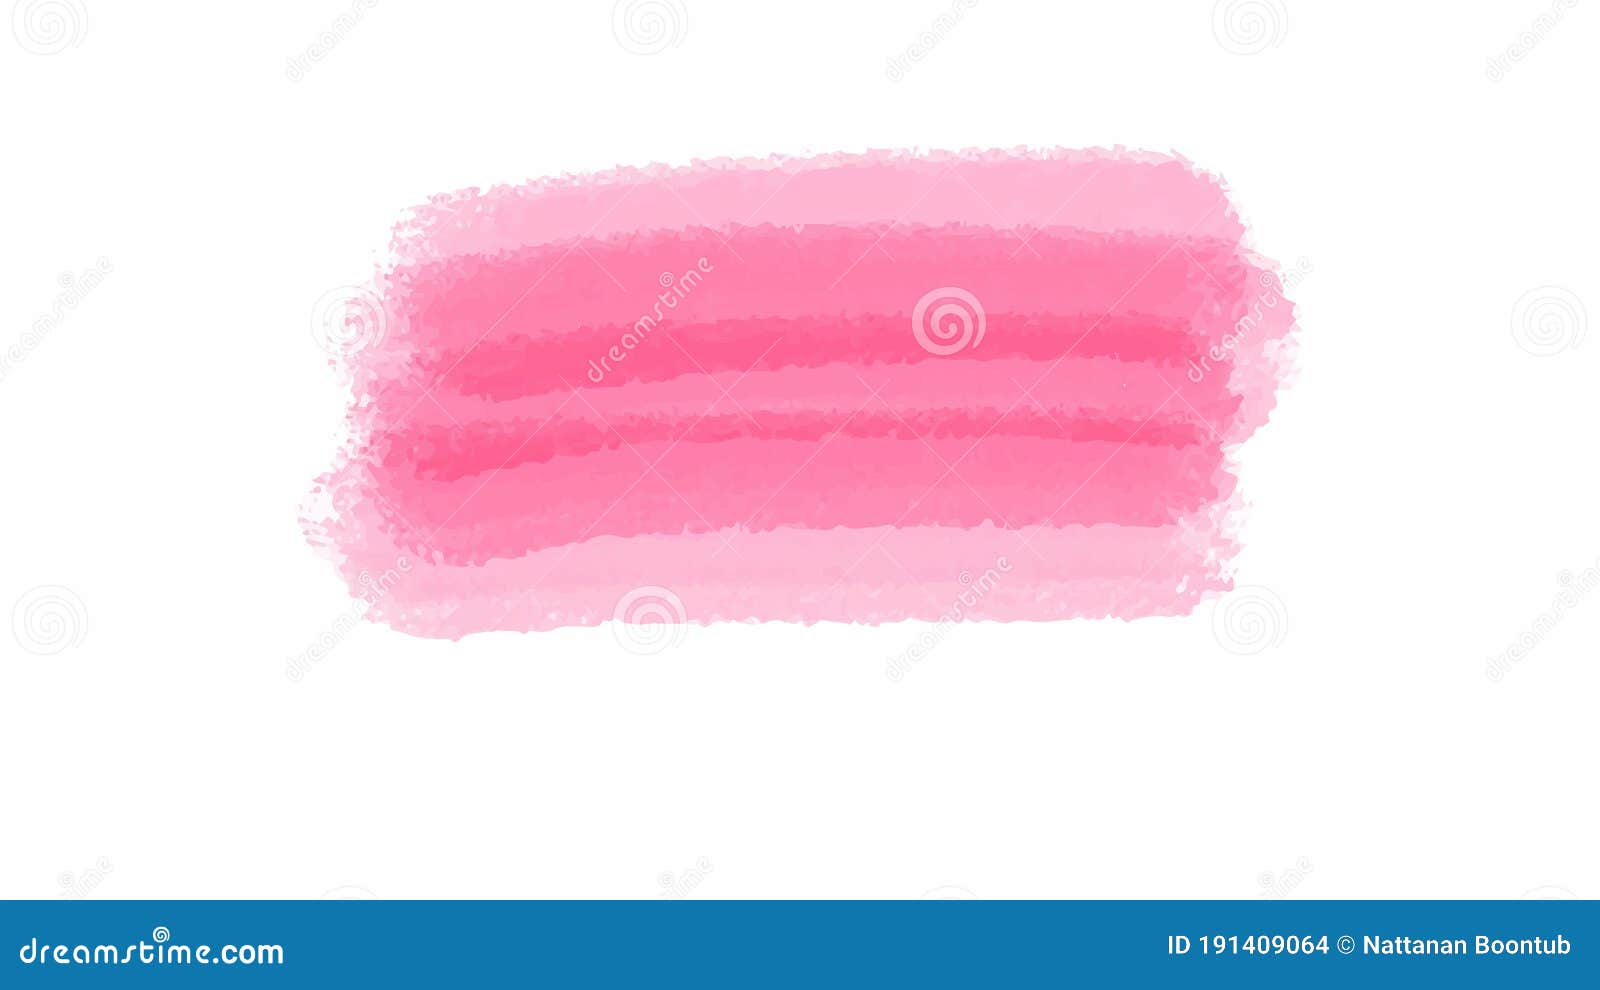 Pink Splash Banner Watercolor Background for Textures Backgrounds and ...